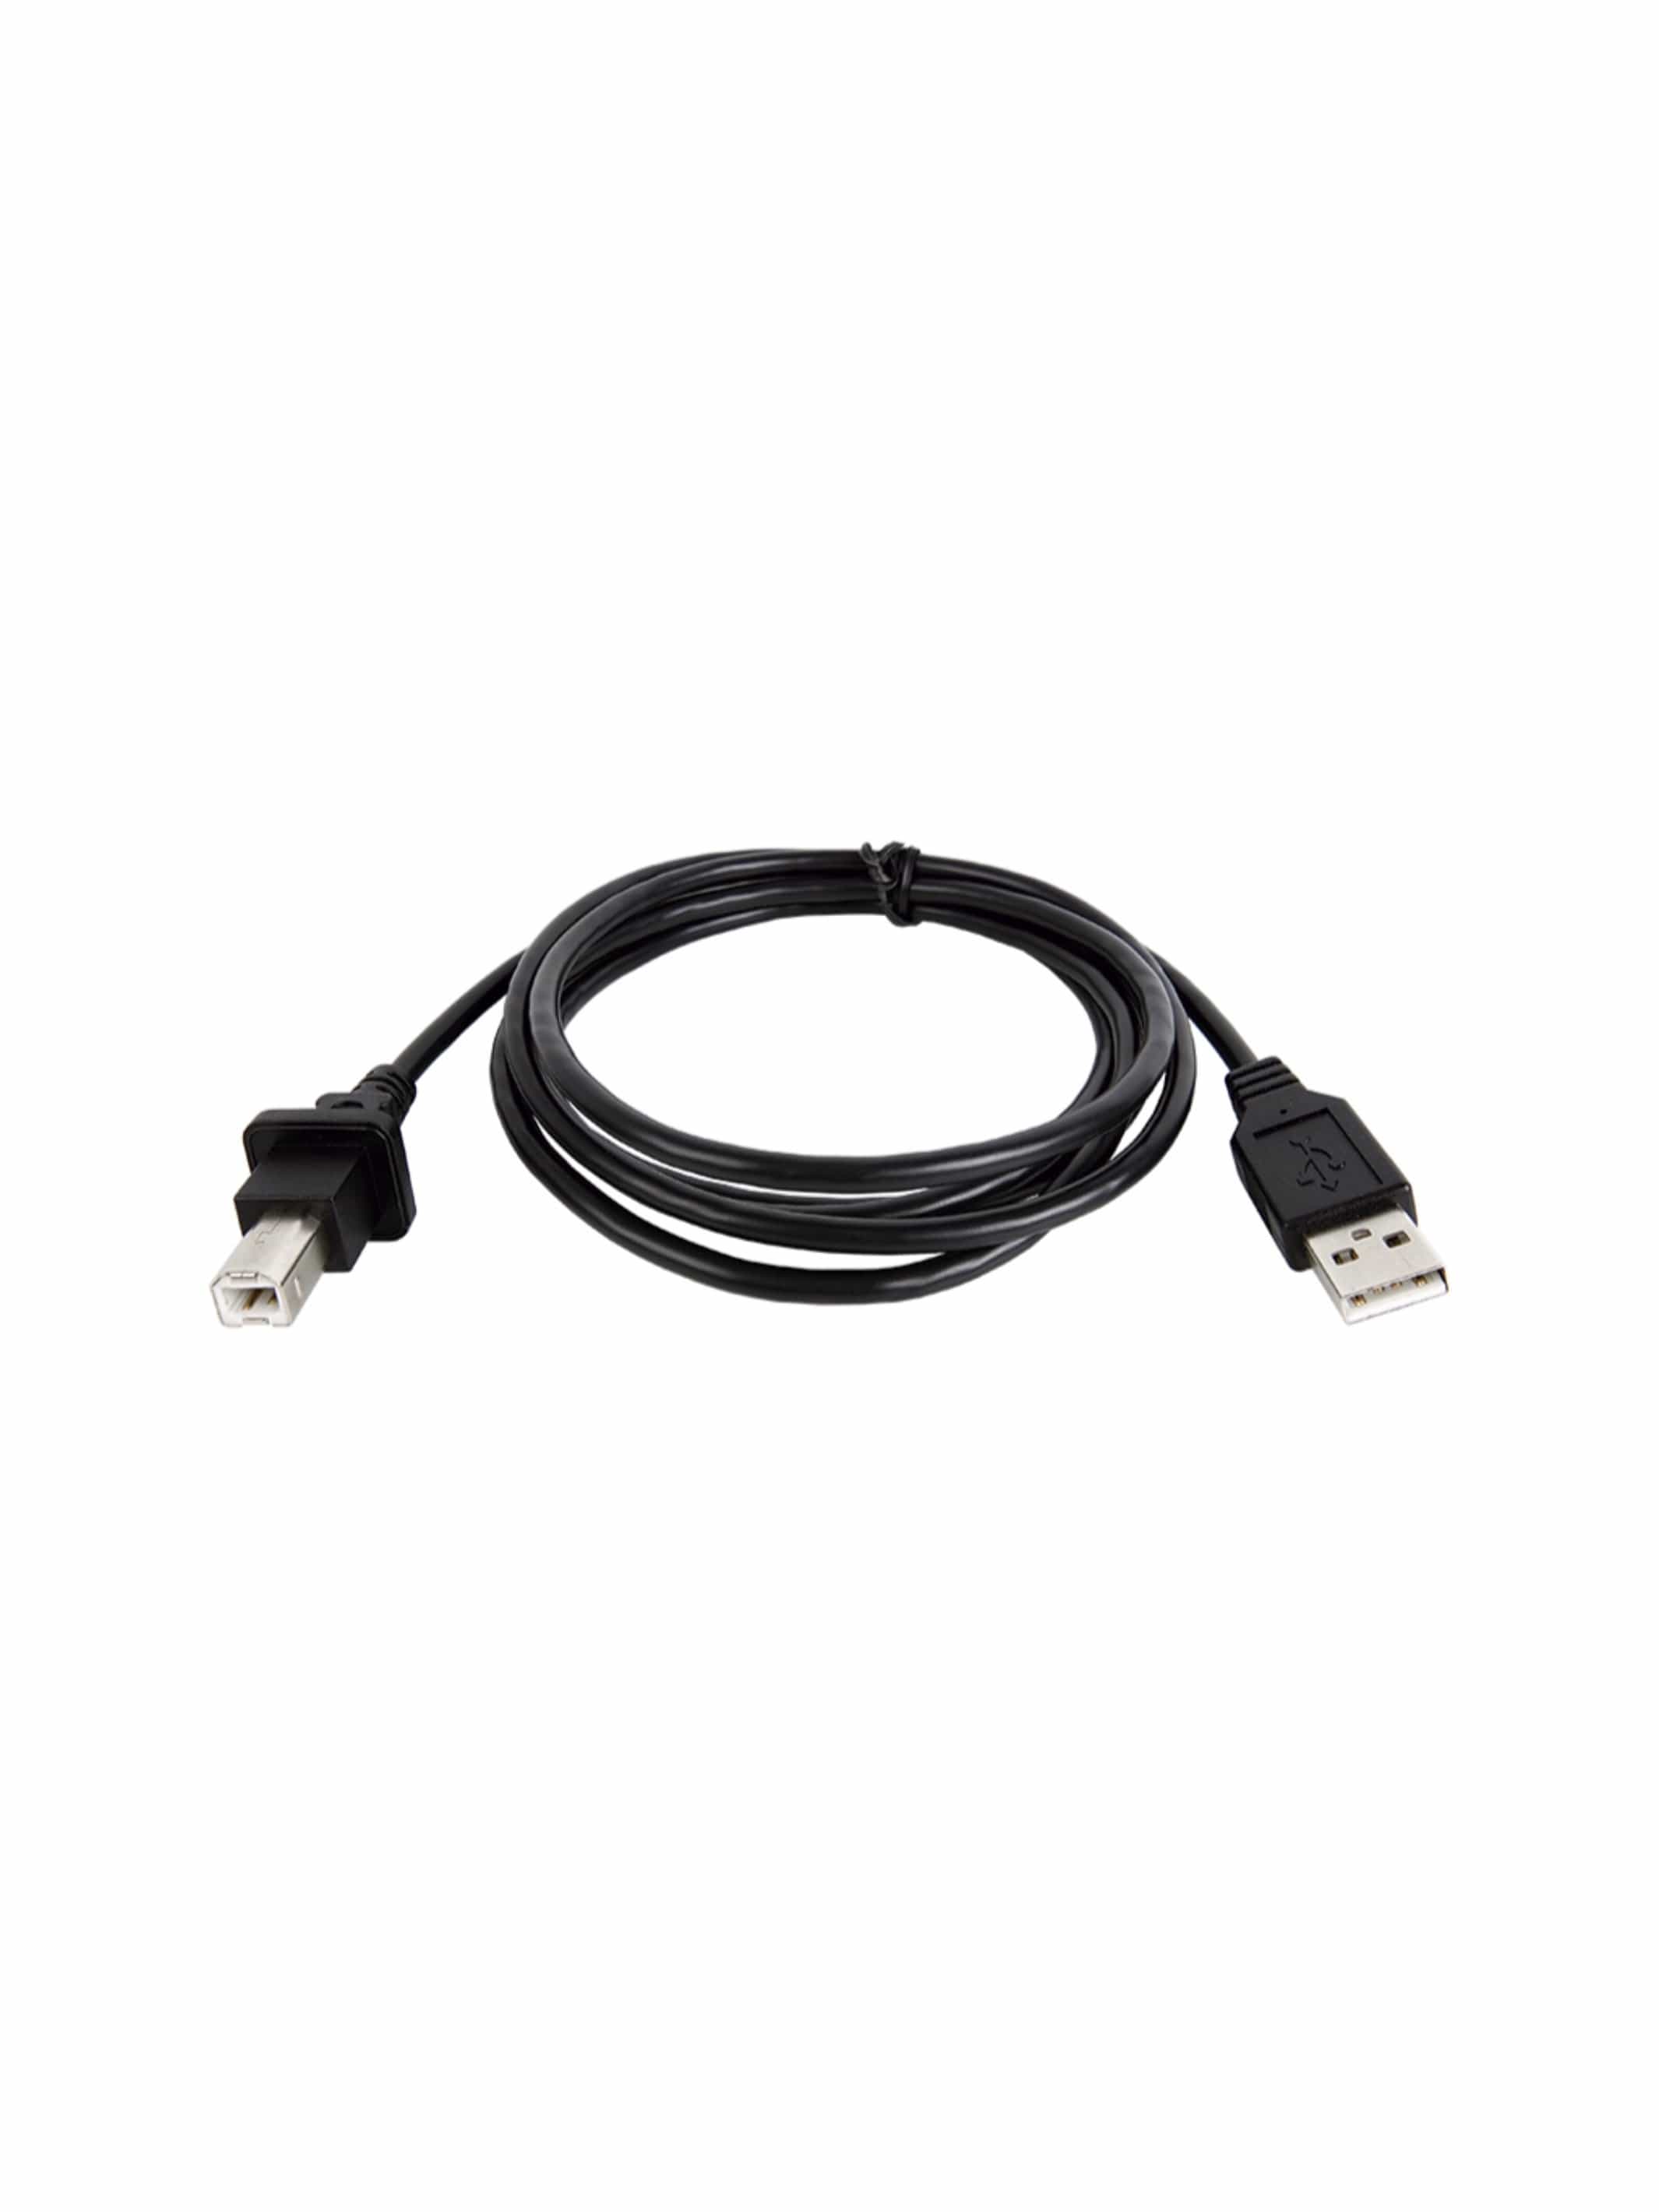 JDC107.9 USB cable - Jaltest Agricultural, Commercial Vehicle, Material Handling, Construction & Heavy Equipment Diagnostic Kit